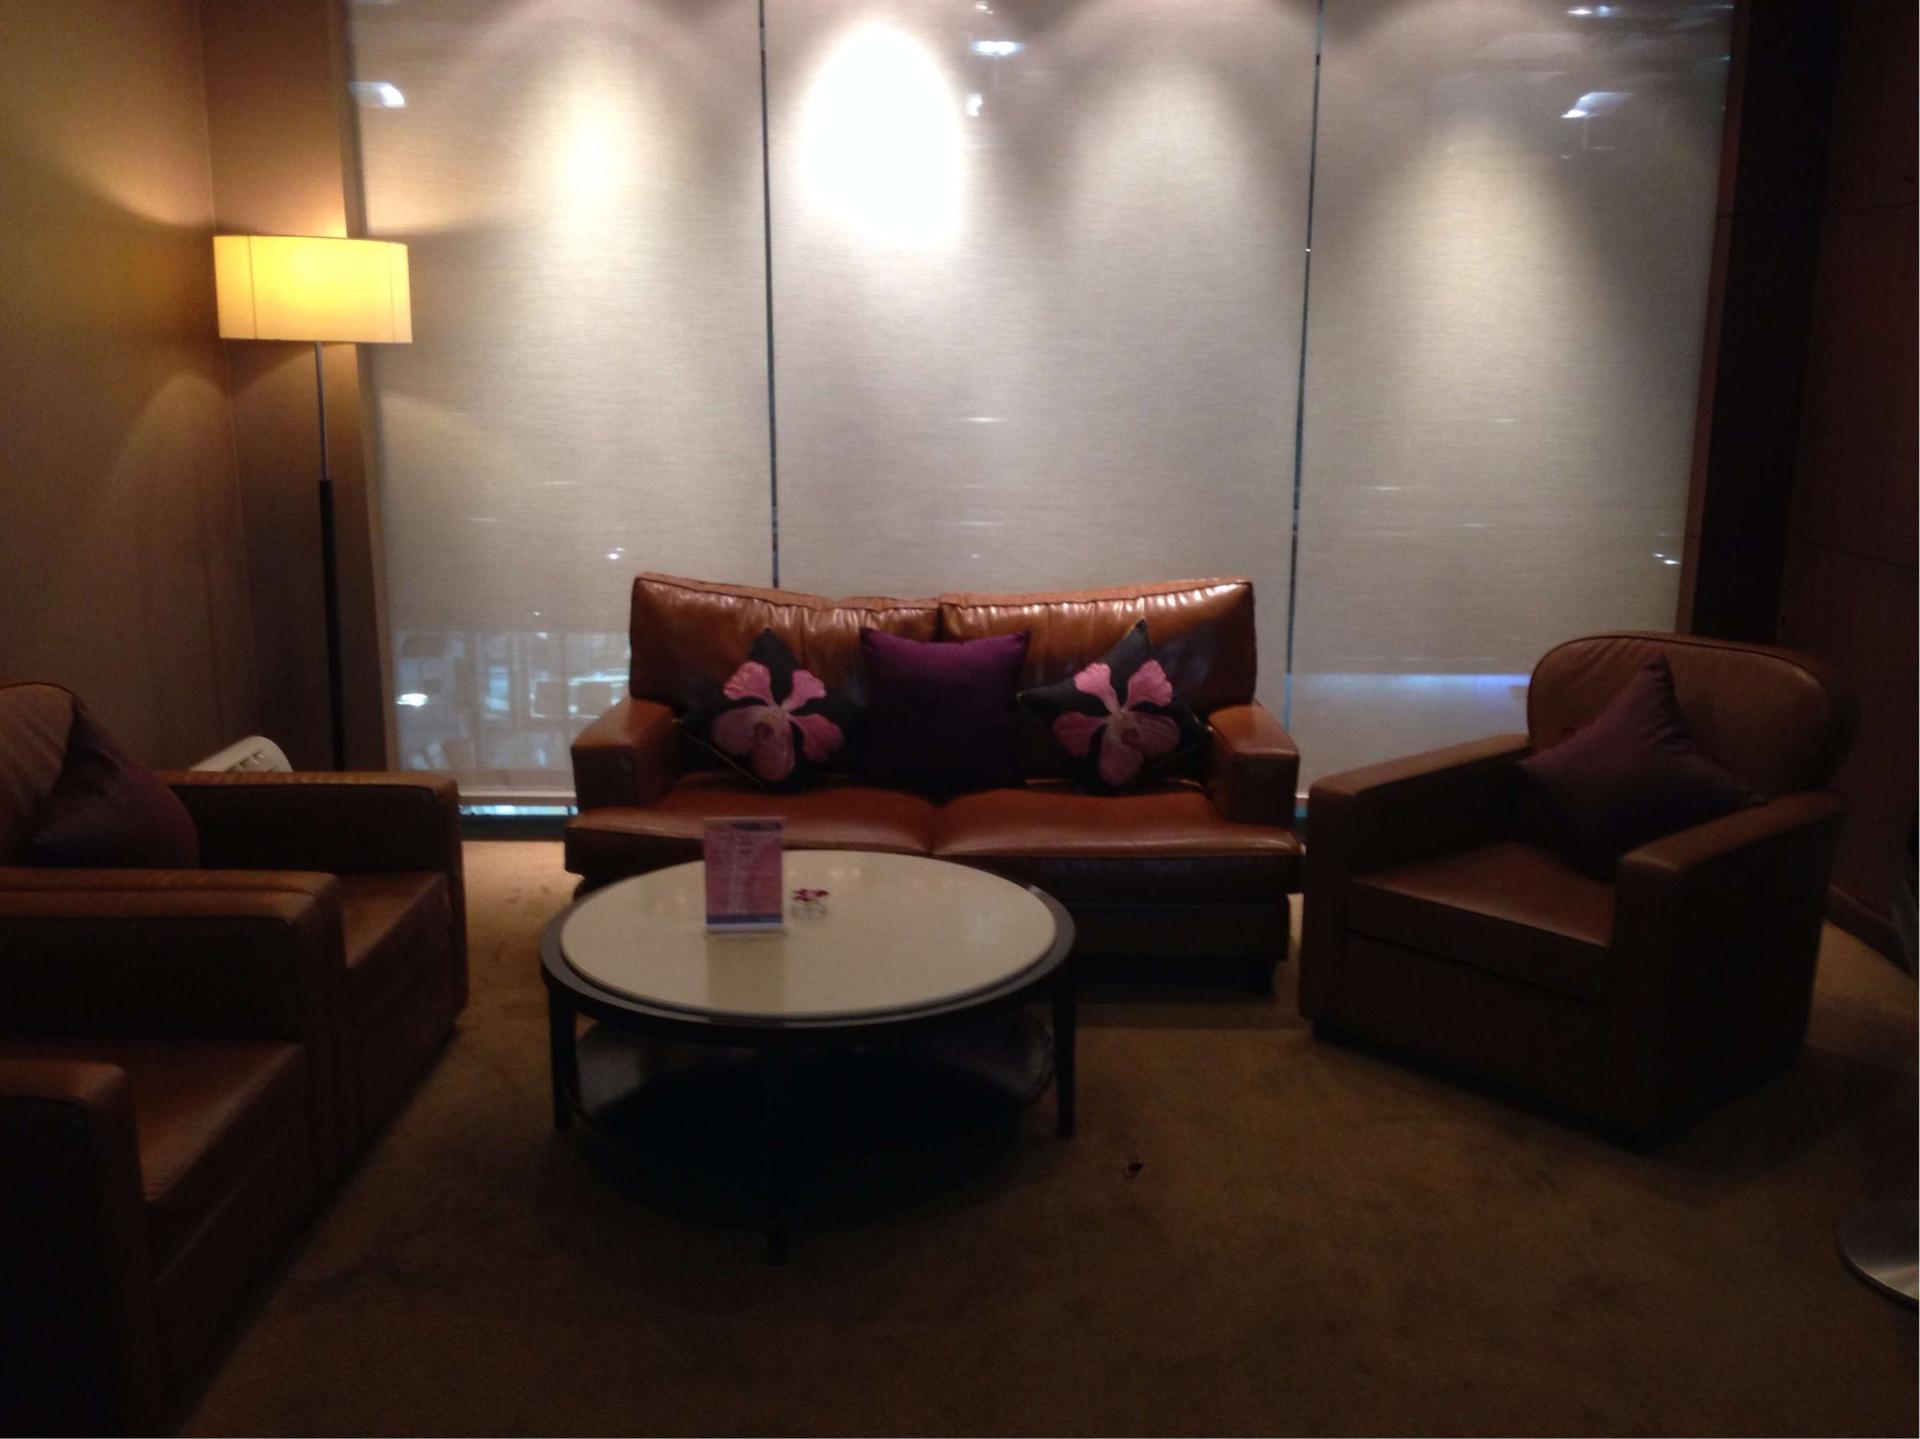 Thai Airways Royal First Class Lounge image 43 of 44